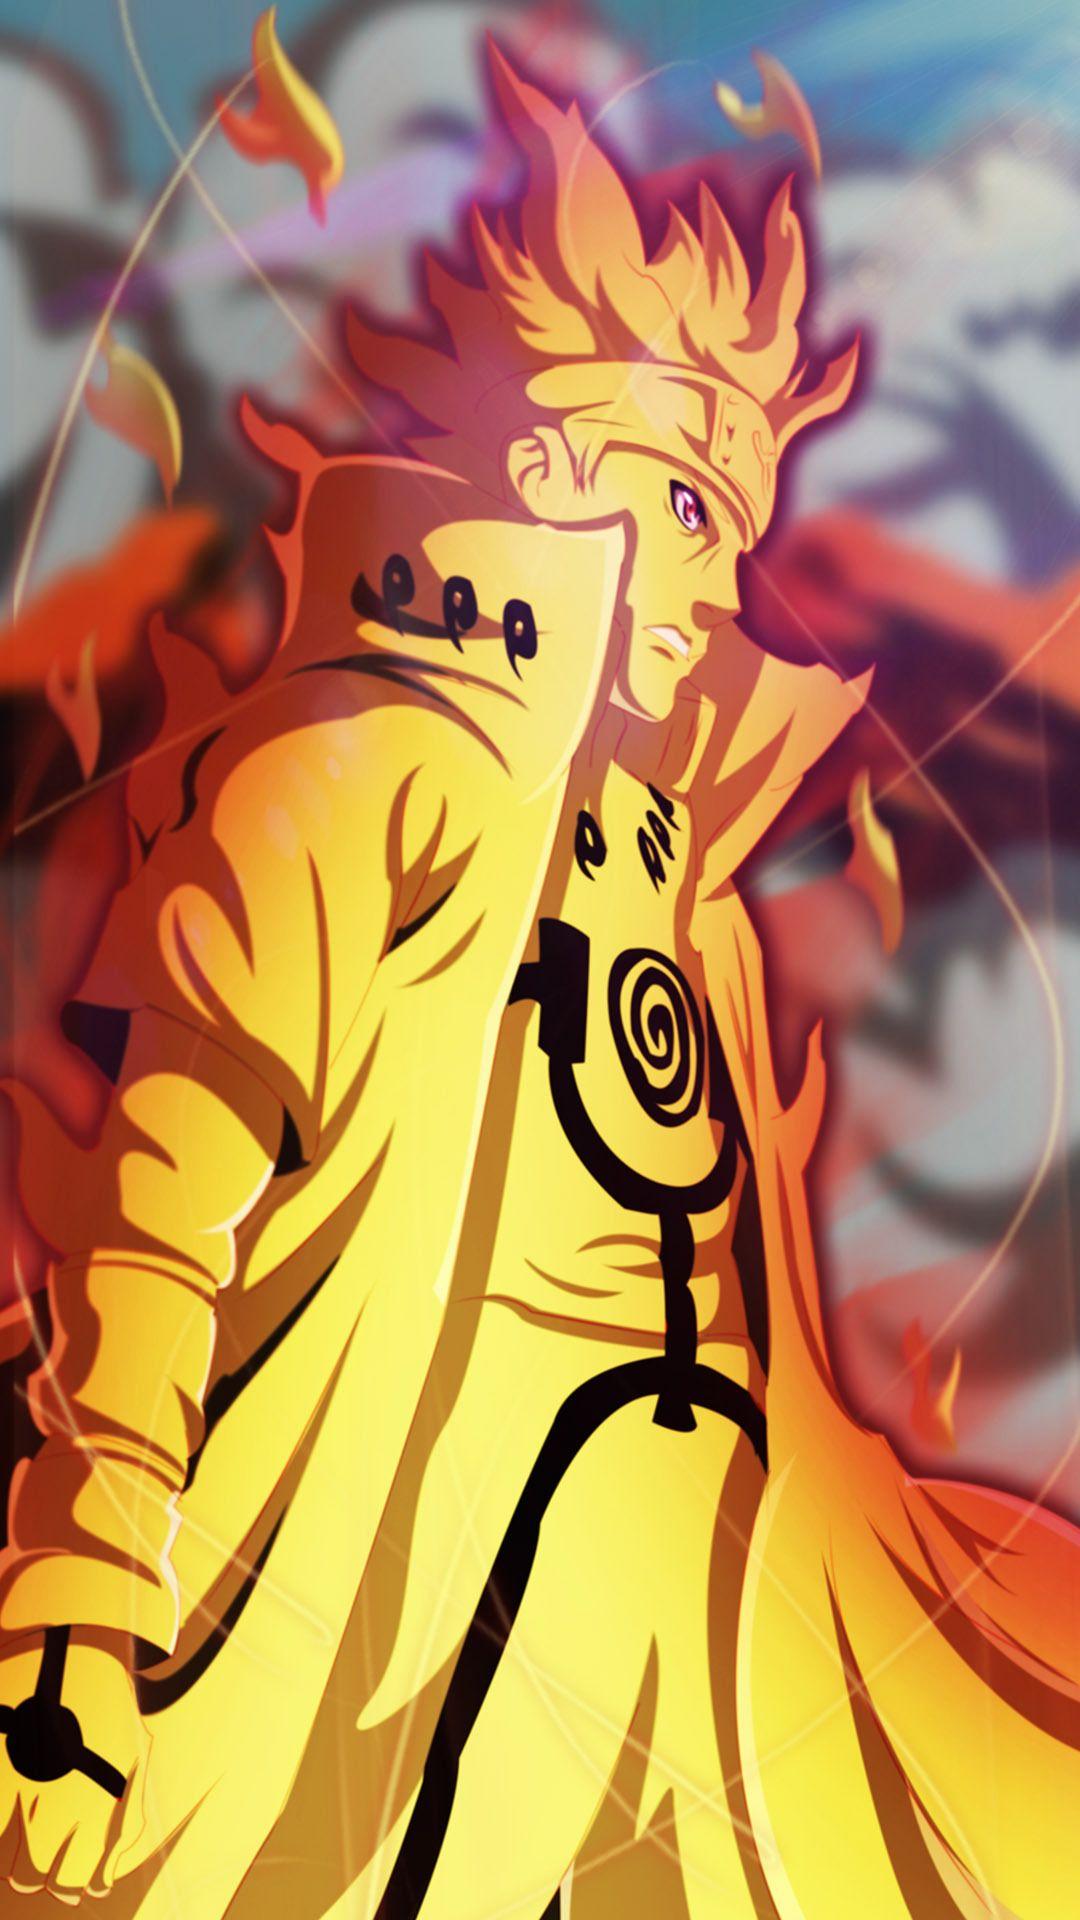 Naruto For iPhone Wallpapers - Wallpaper Cave